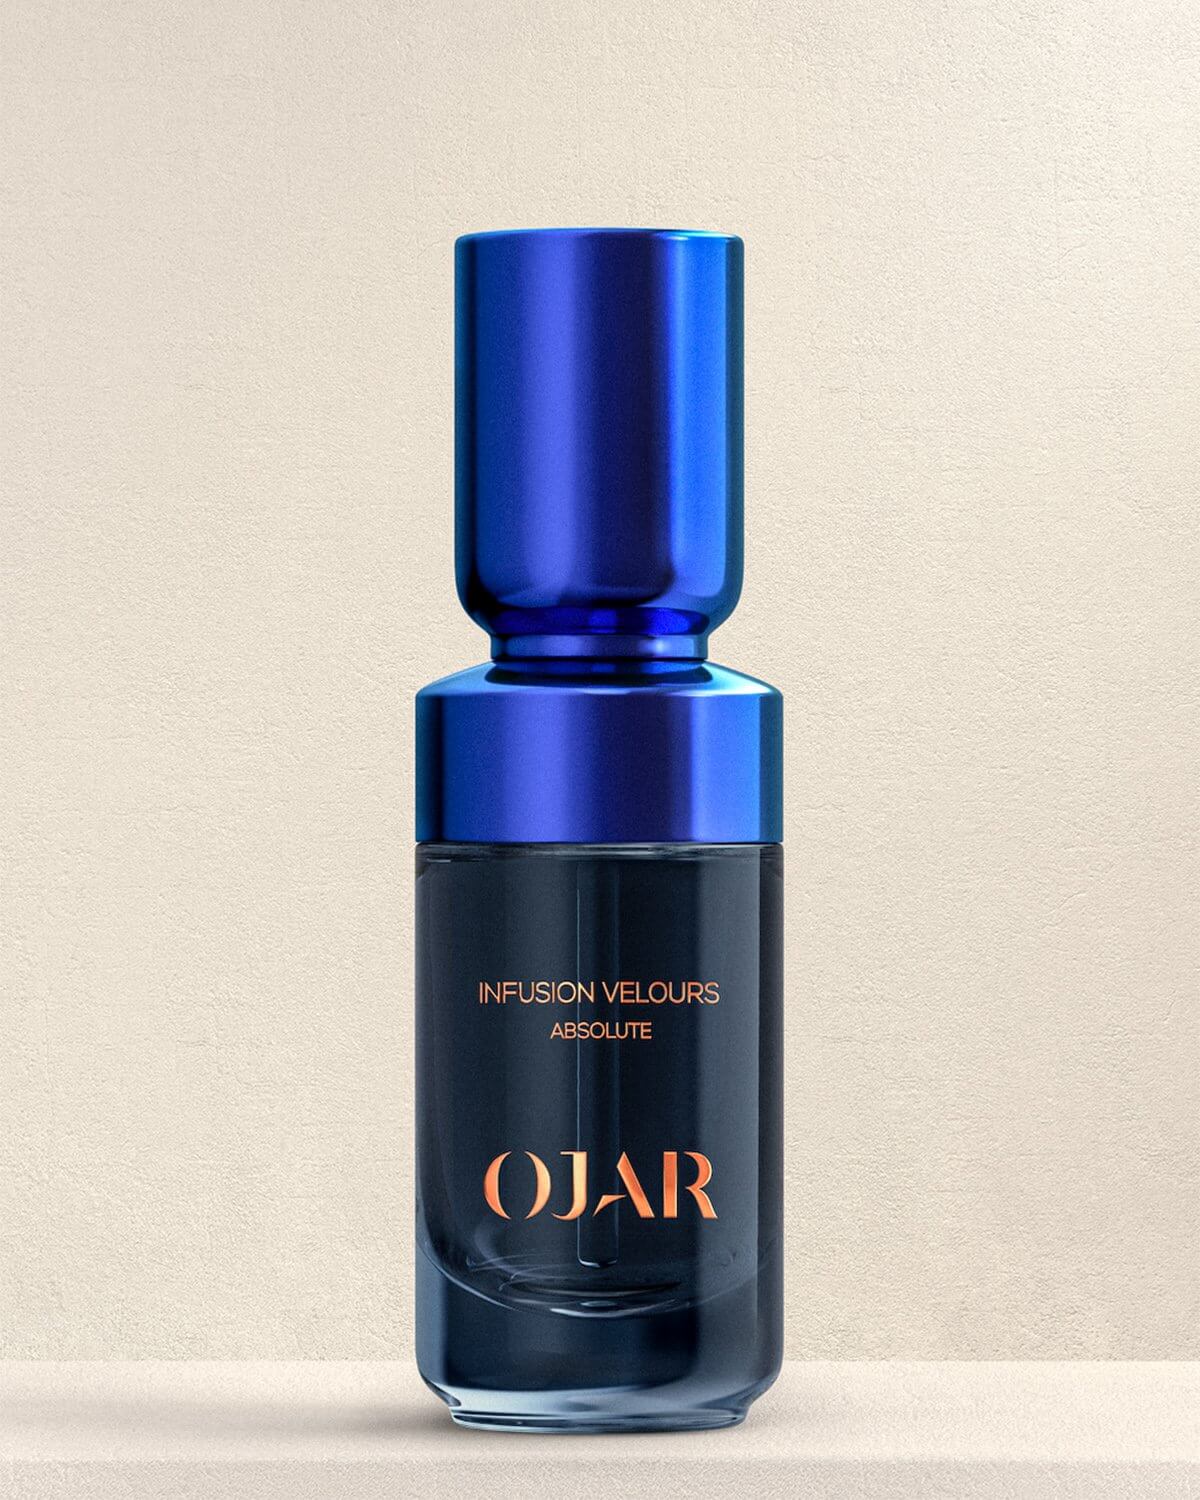 OJAR - ABSOLUTE: INFUSION VELOURS